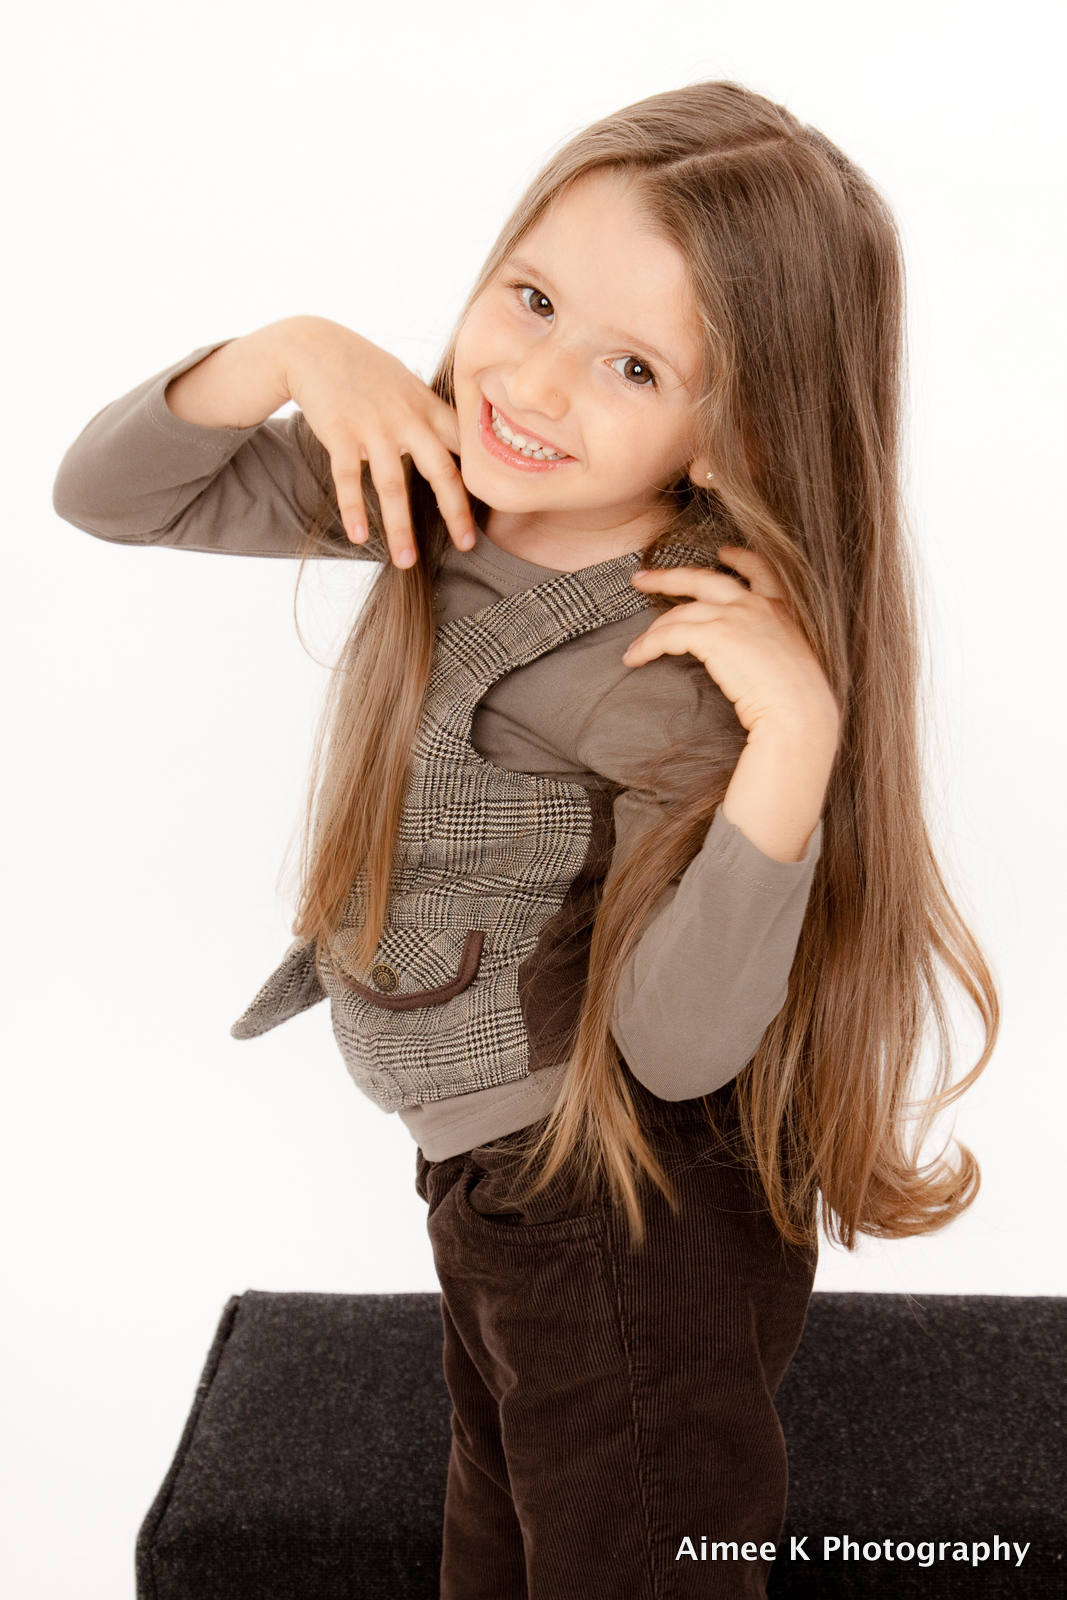 Download this Child Models Webpage picture